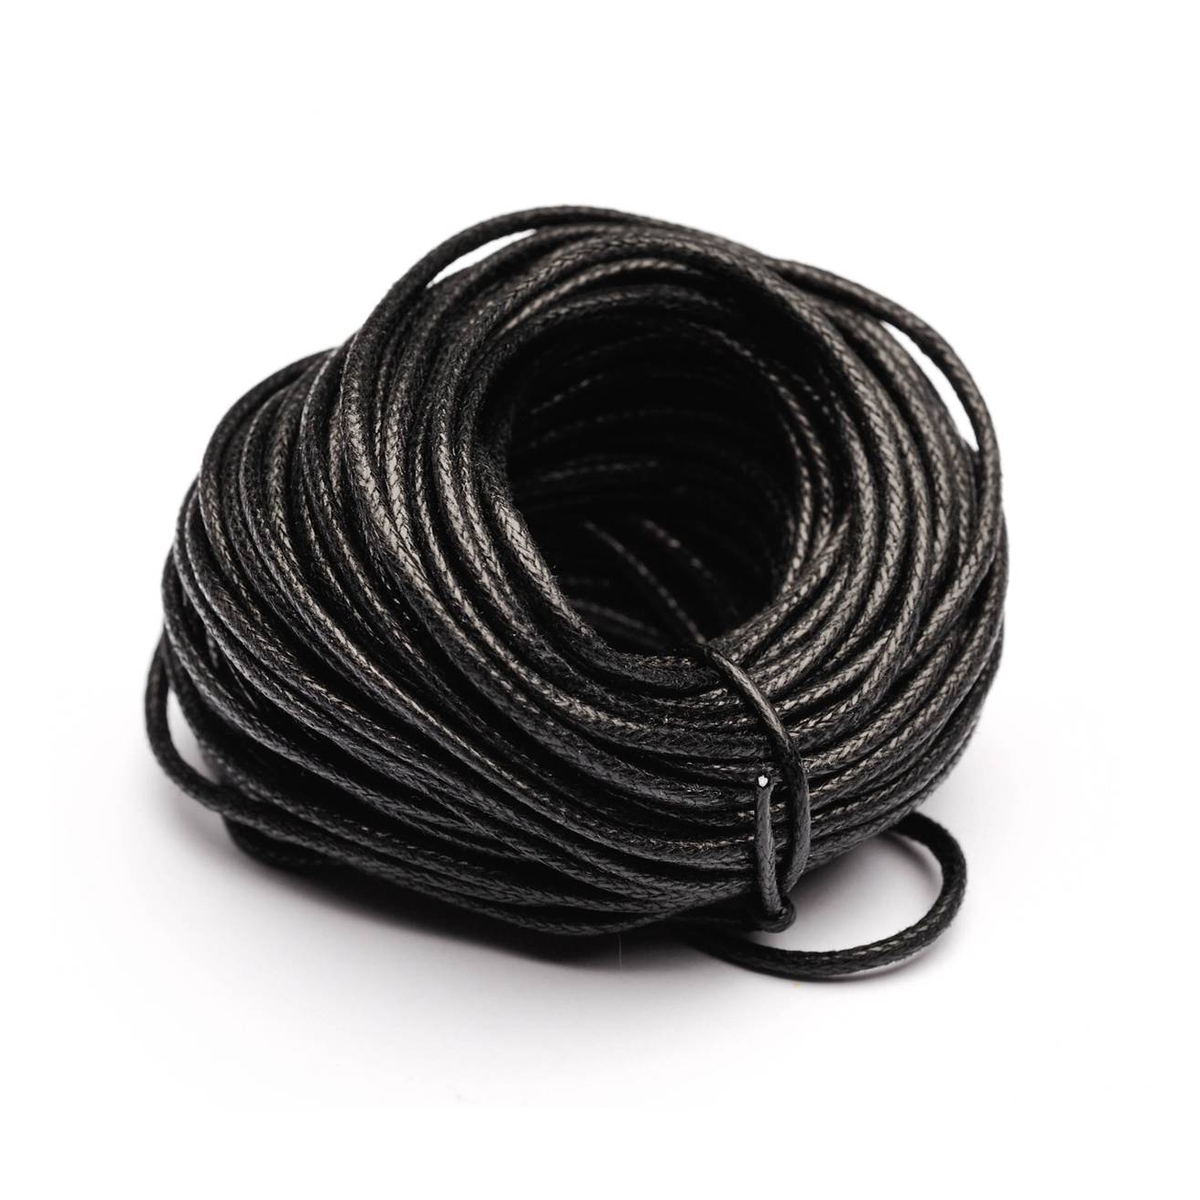 3m Top Quality Black Cotton Waxed Cord - Necklaces Jewellery